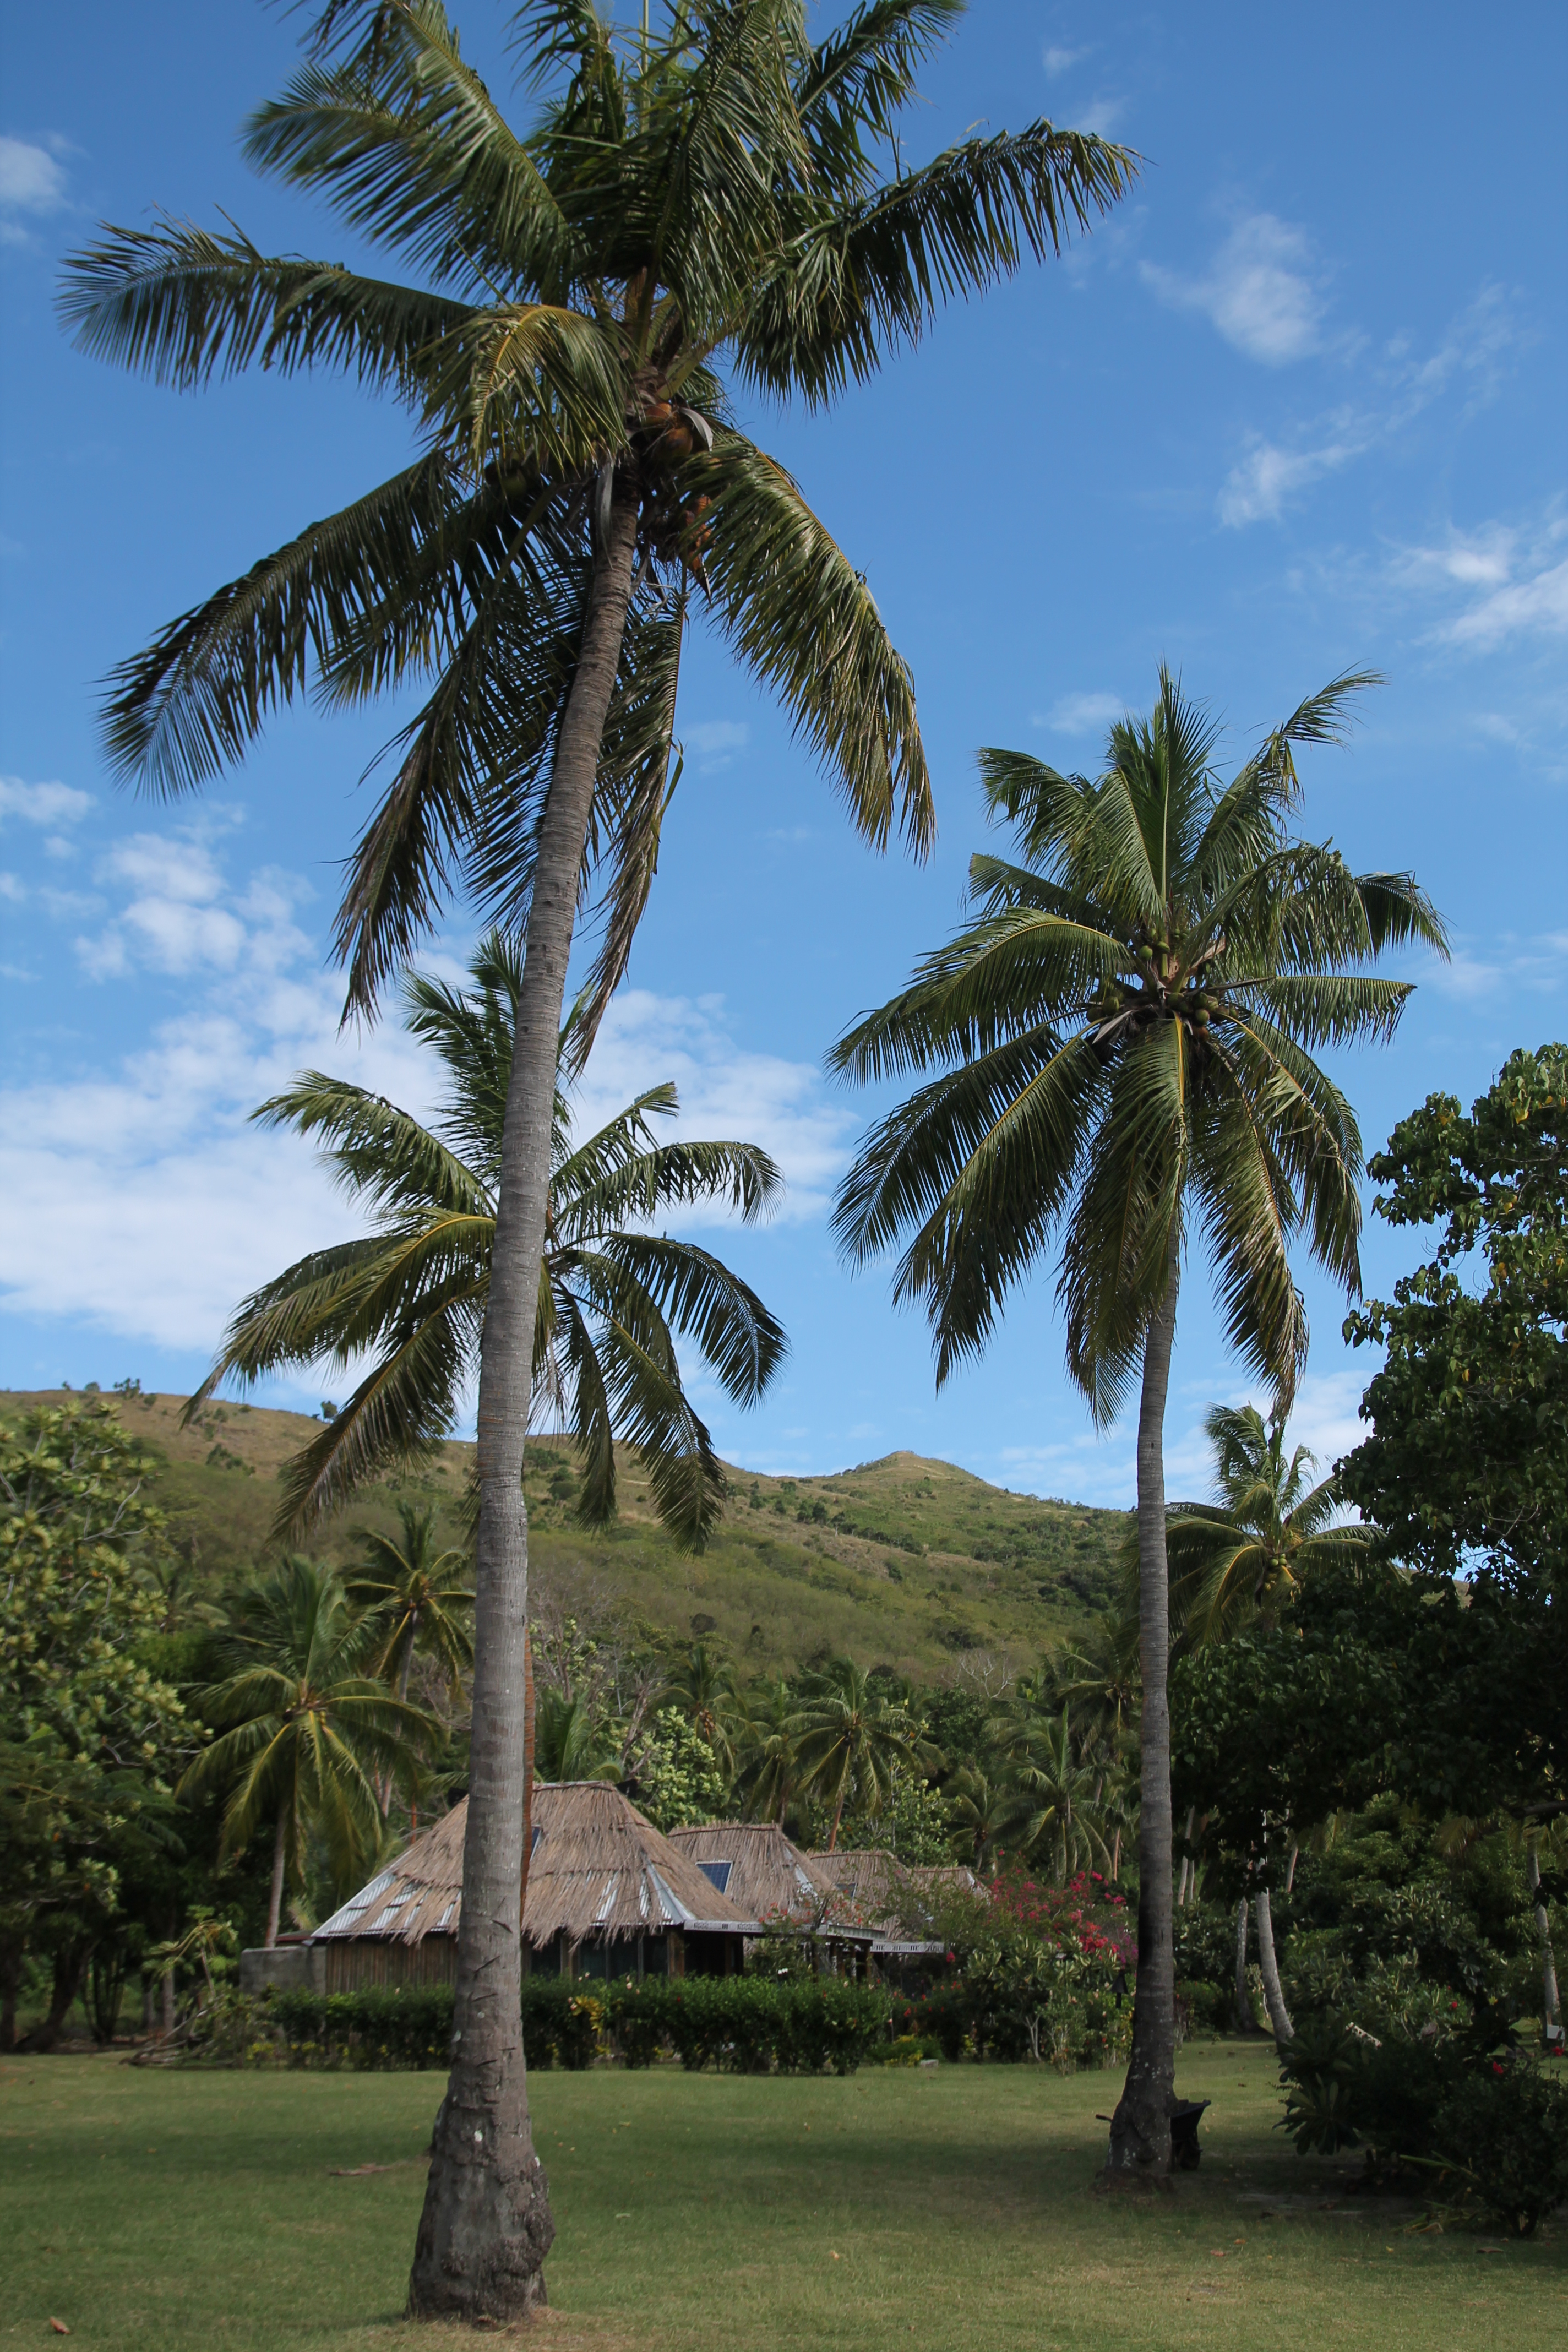 The guest bures among the palm trees at Botaira Resort, Naviti Island, Yasawas Picture credit Debbie Griffiths